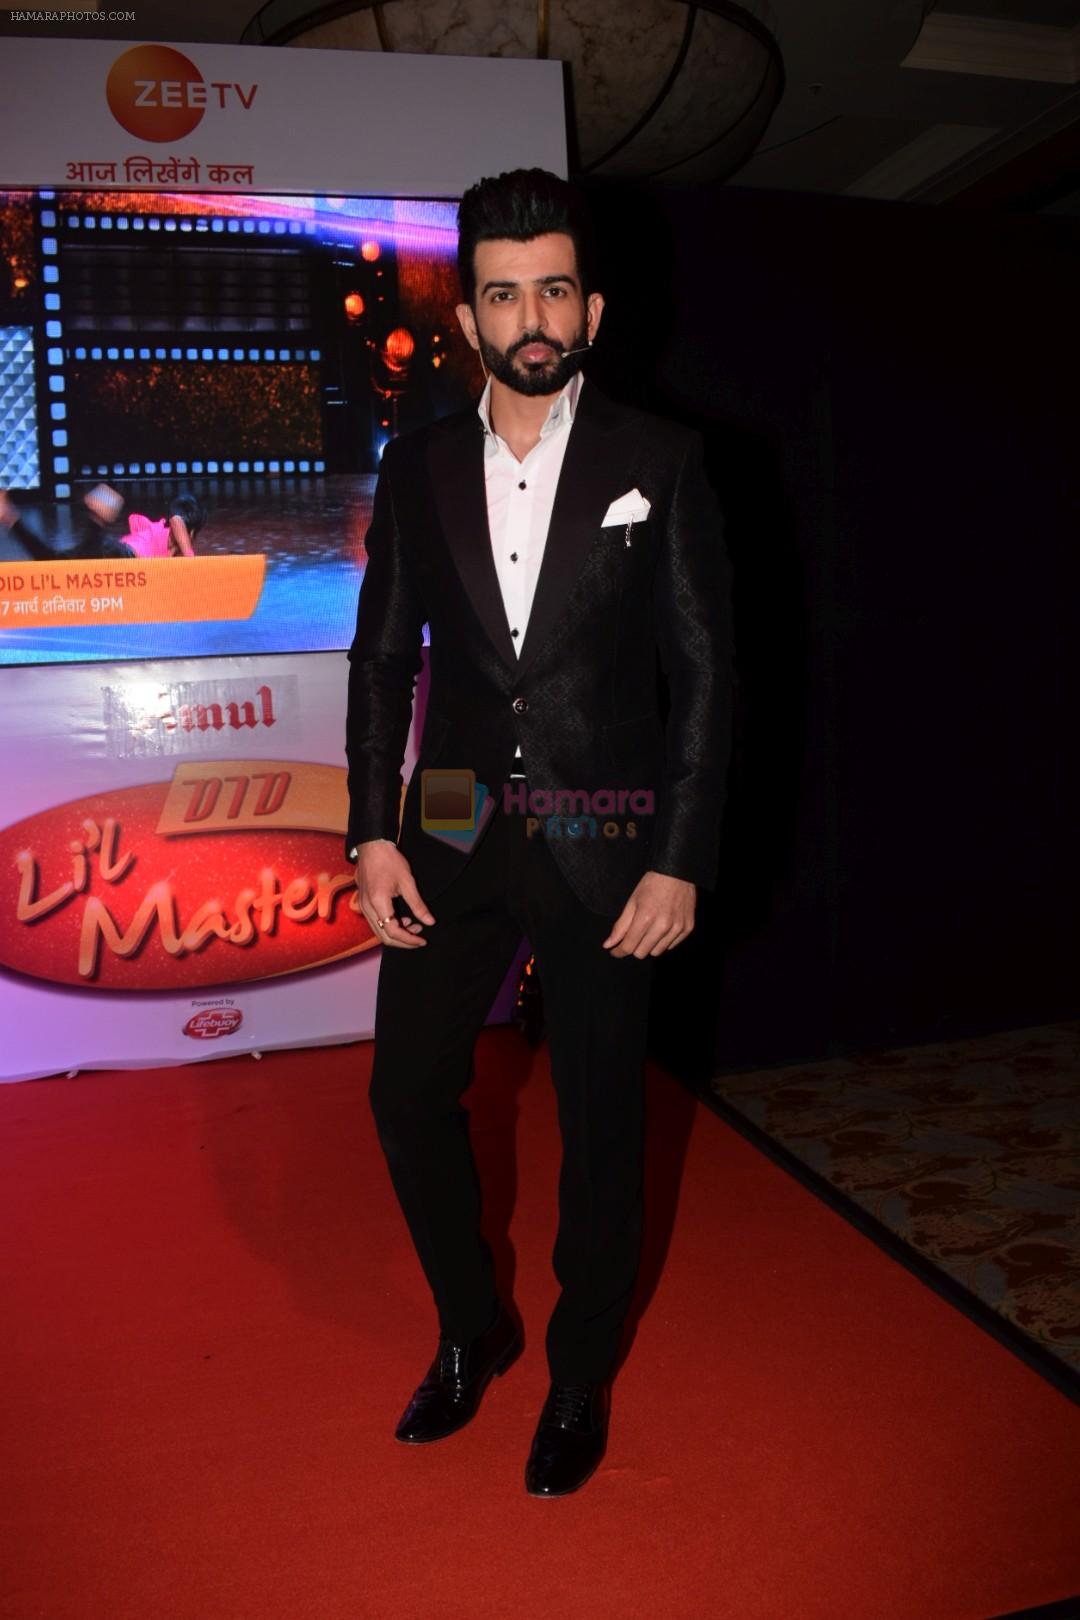 Jay Bhanushali at the press conference of Dance India Dance Li_l Masters on 13th March 2018